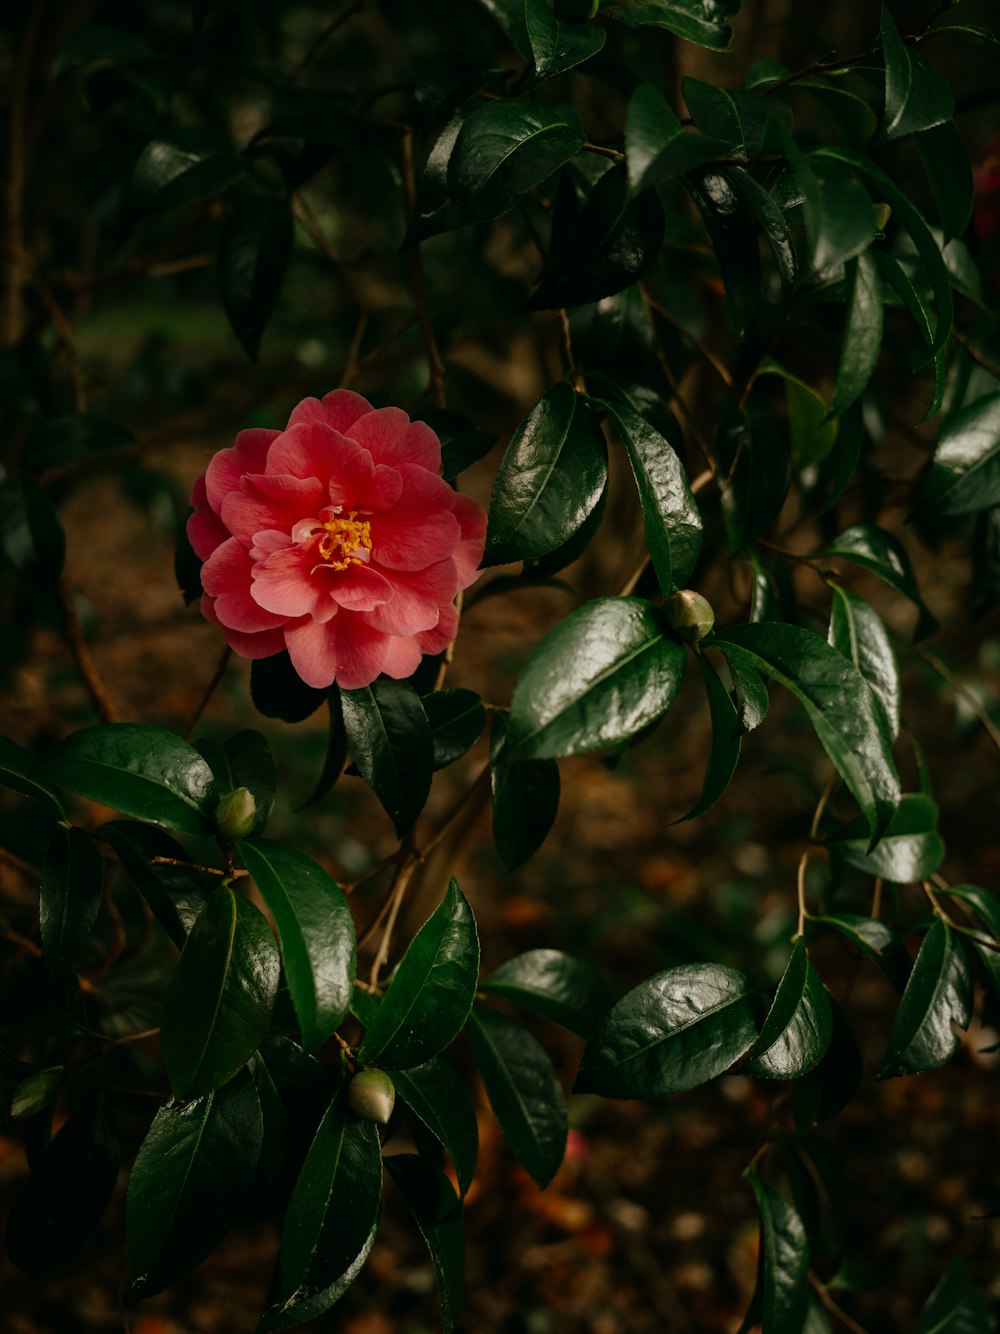 a pink flower with a yellow center surrounded by green leaves